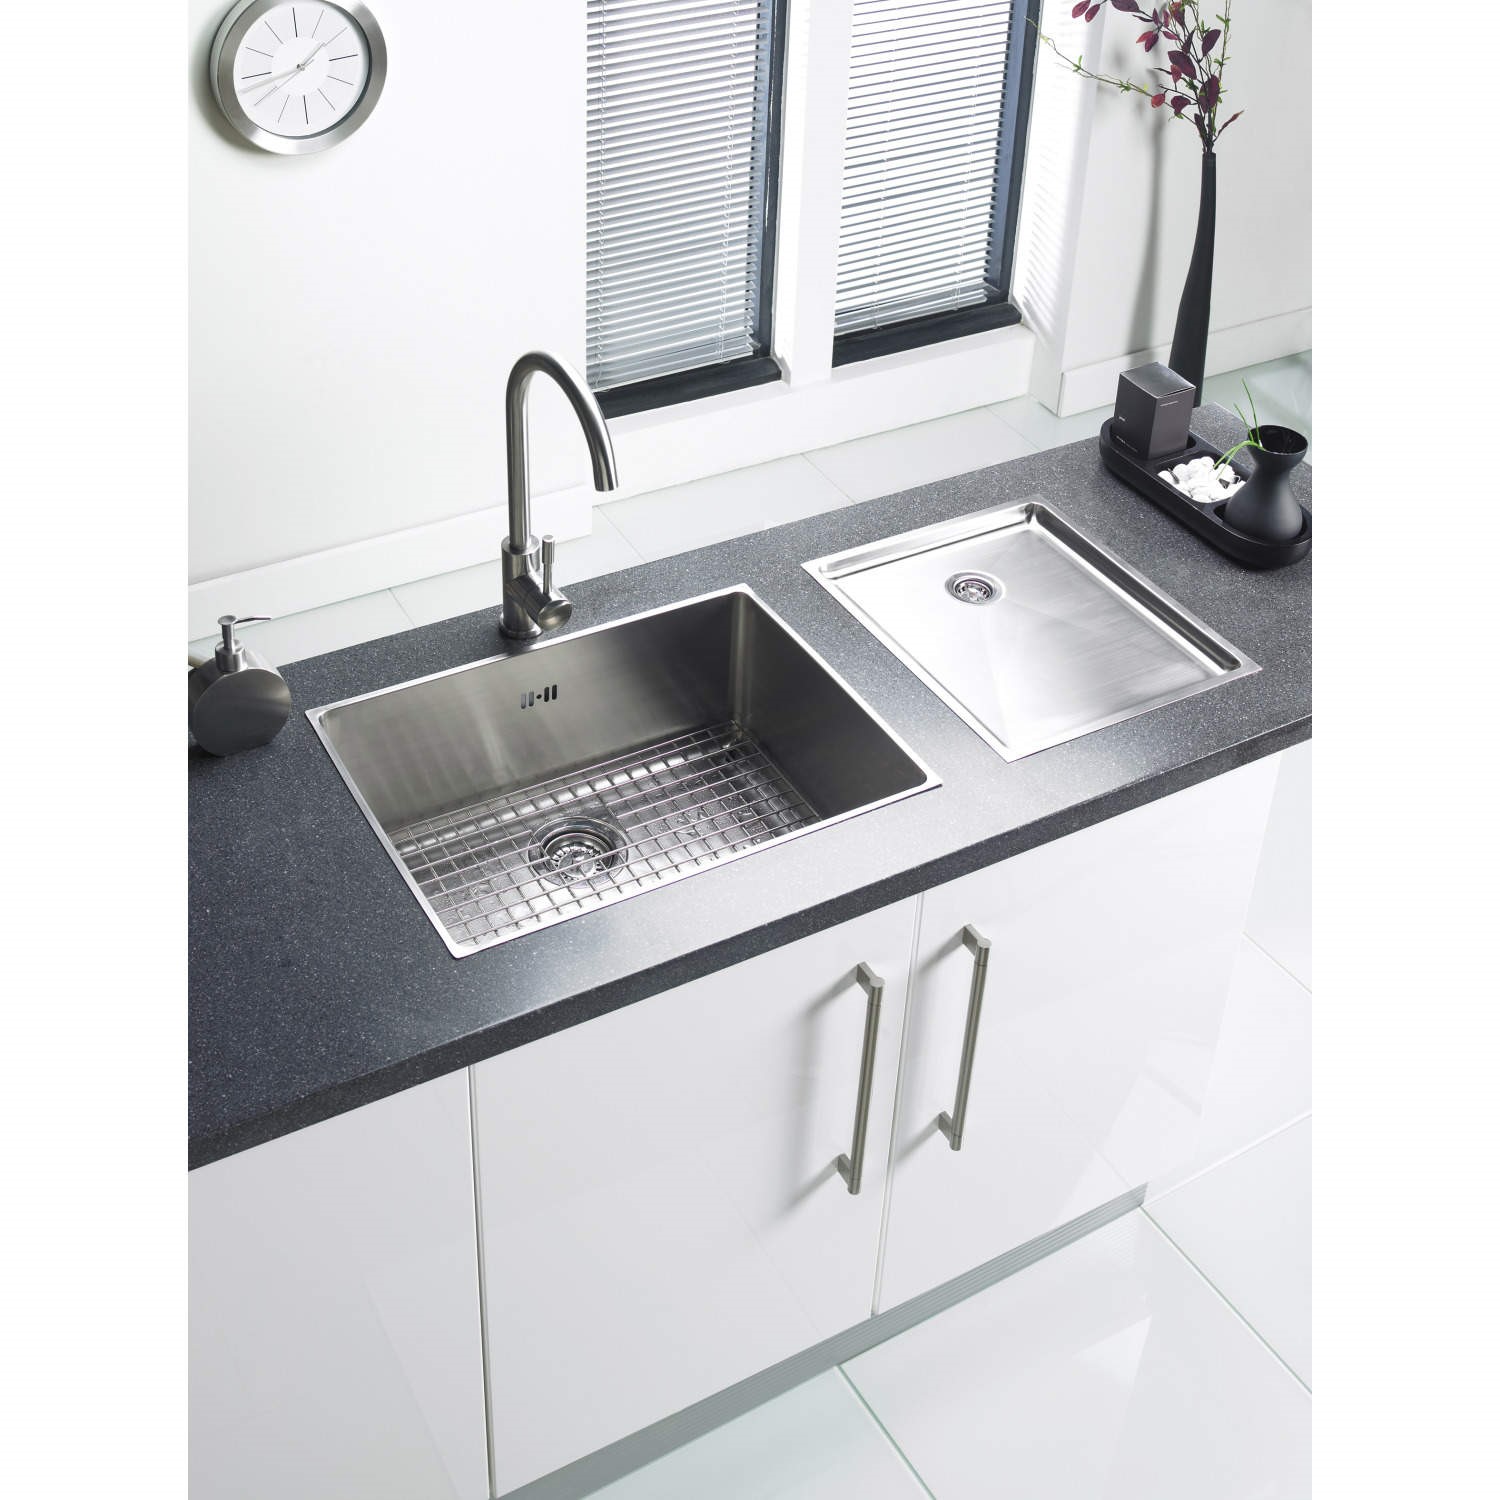 Astracast Oxs1xbhomepk Onyx Undermount Square Large Single Bowl Brushed Stainless Steel Sink